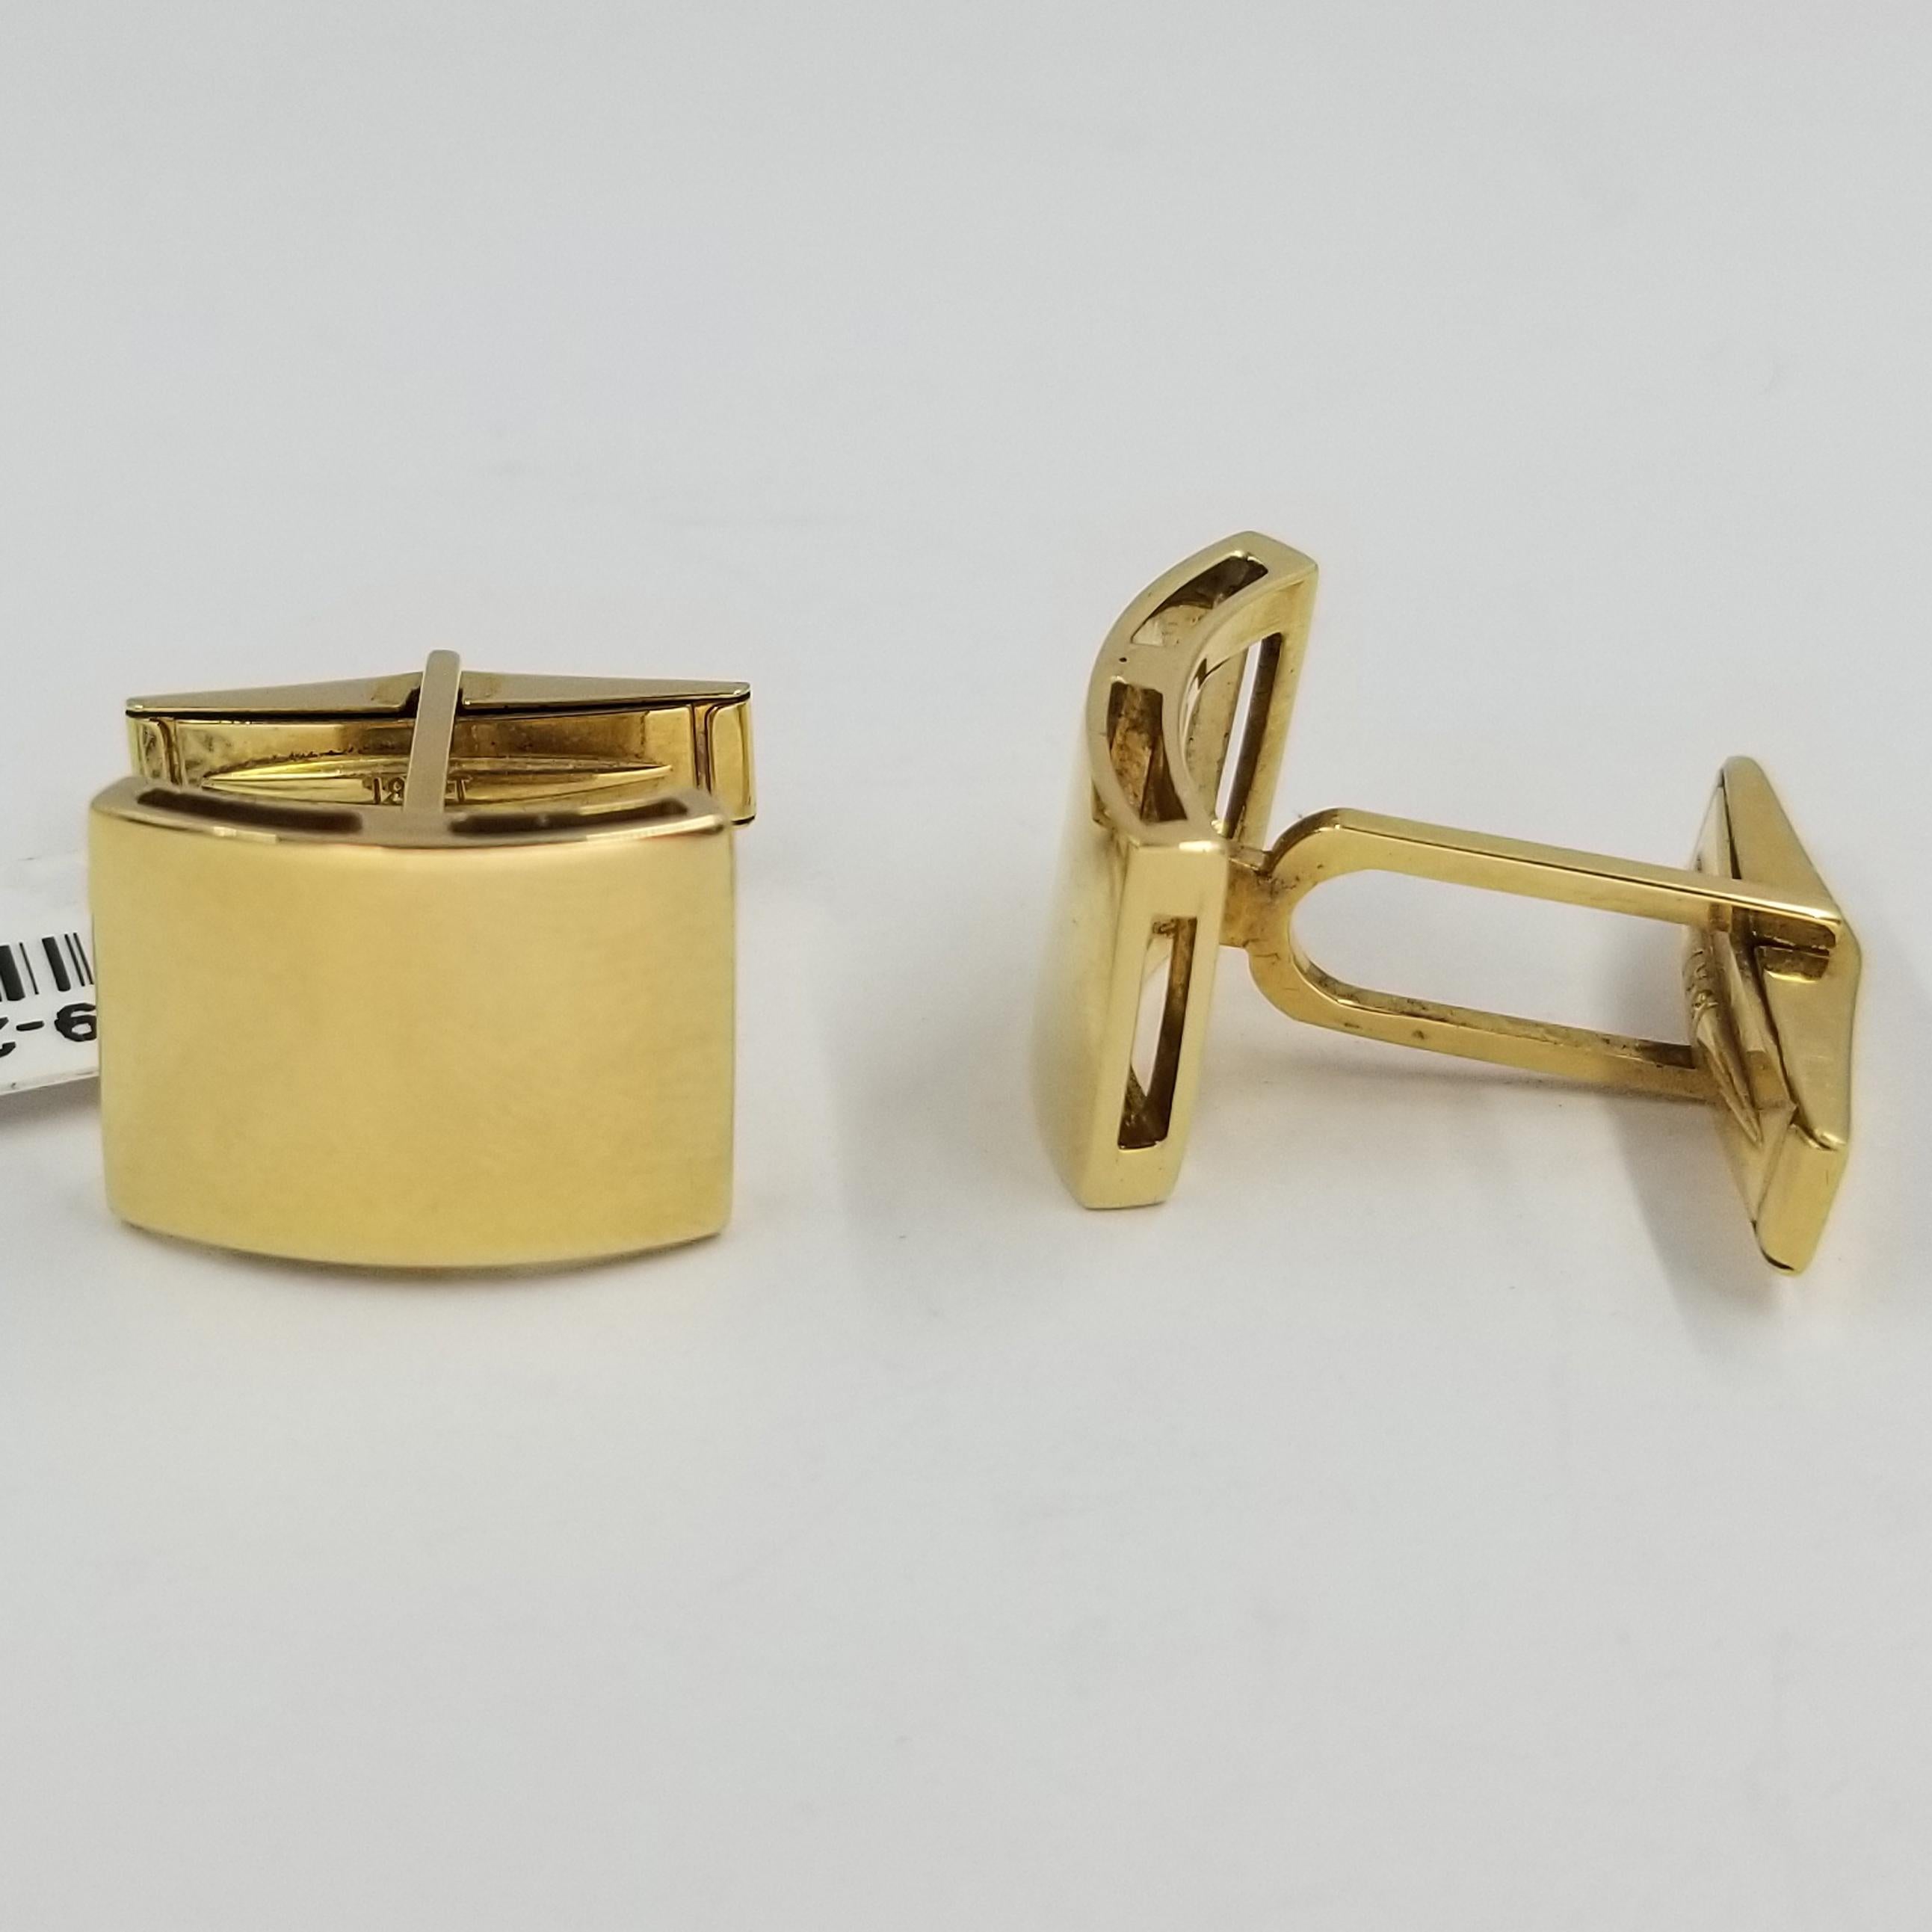 Set of 2 cufflinks crafted in 18 karat yellow gold (stamped). The fronts are polished and curve outward. The backs are a hinged torpedo style for easy dressing.